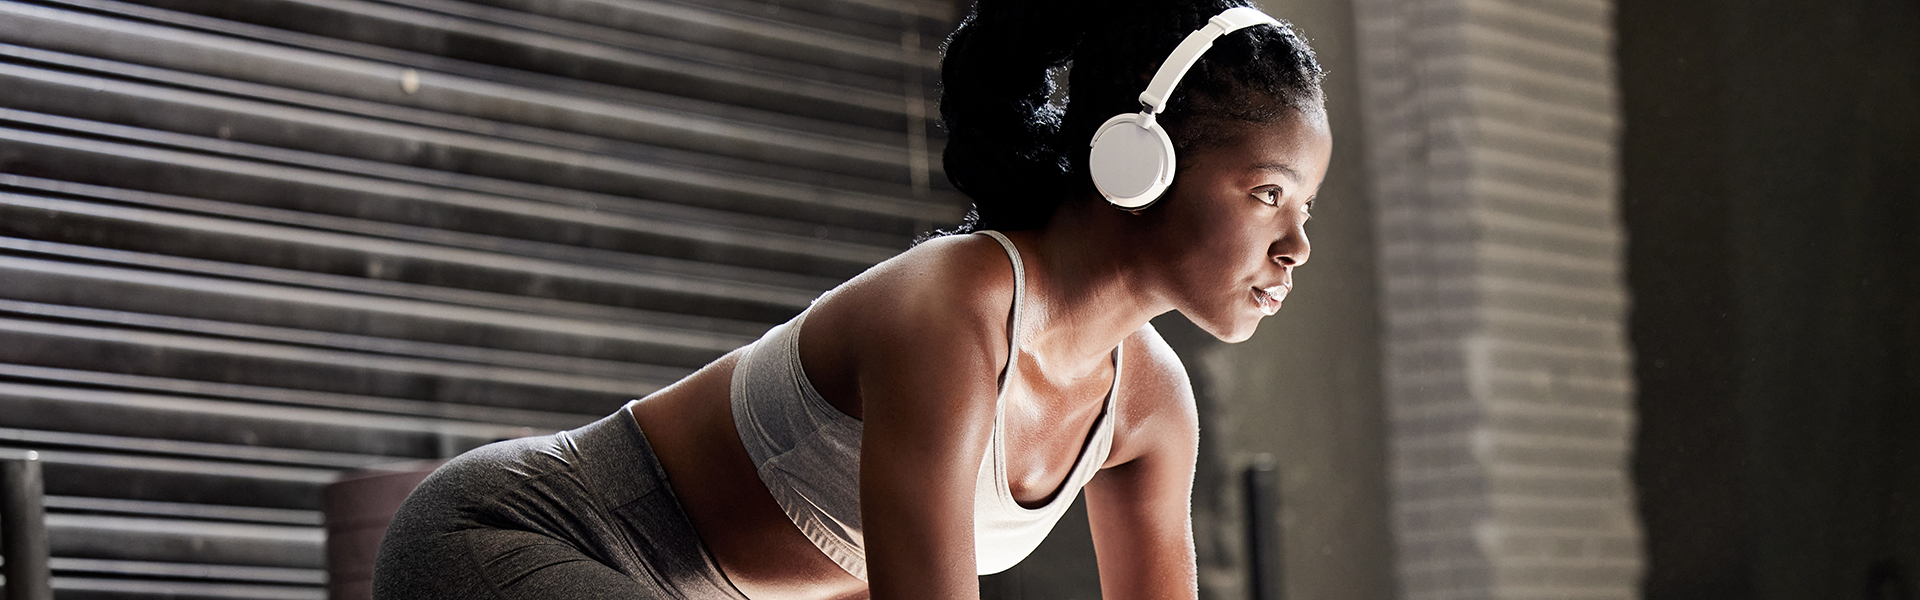 Pump up the jam: Musical impact on exercise performance explained